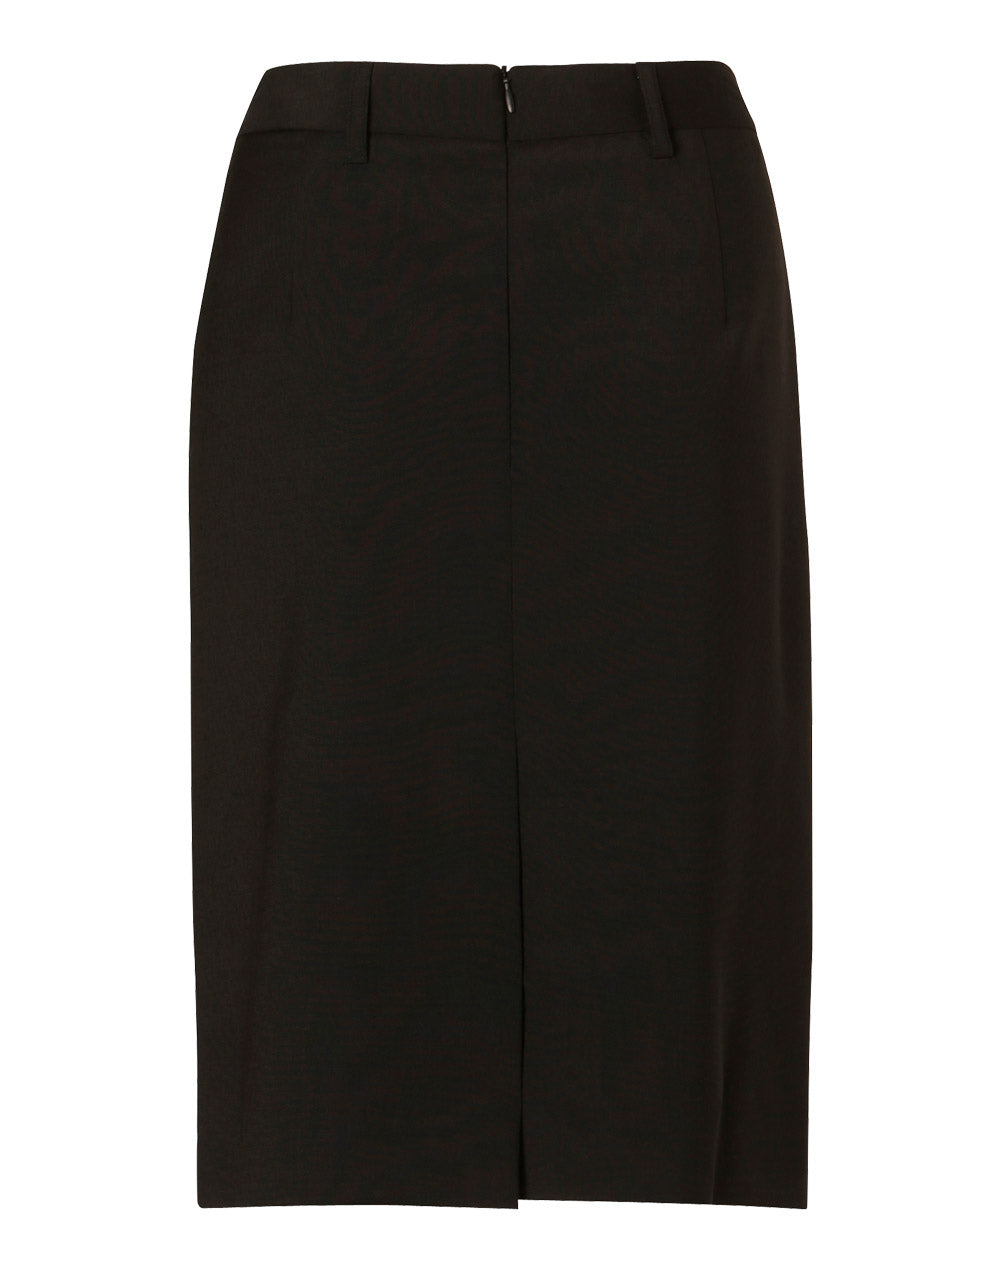 M9470 Women's Wool Blend Stretch Mid Length Lined Pencil Skirt